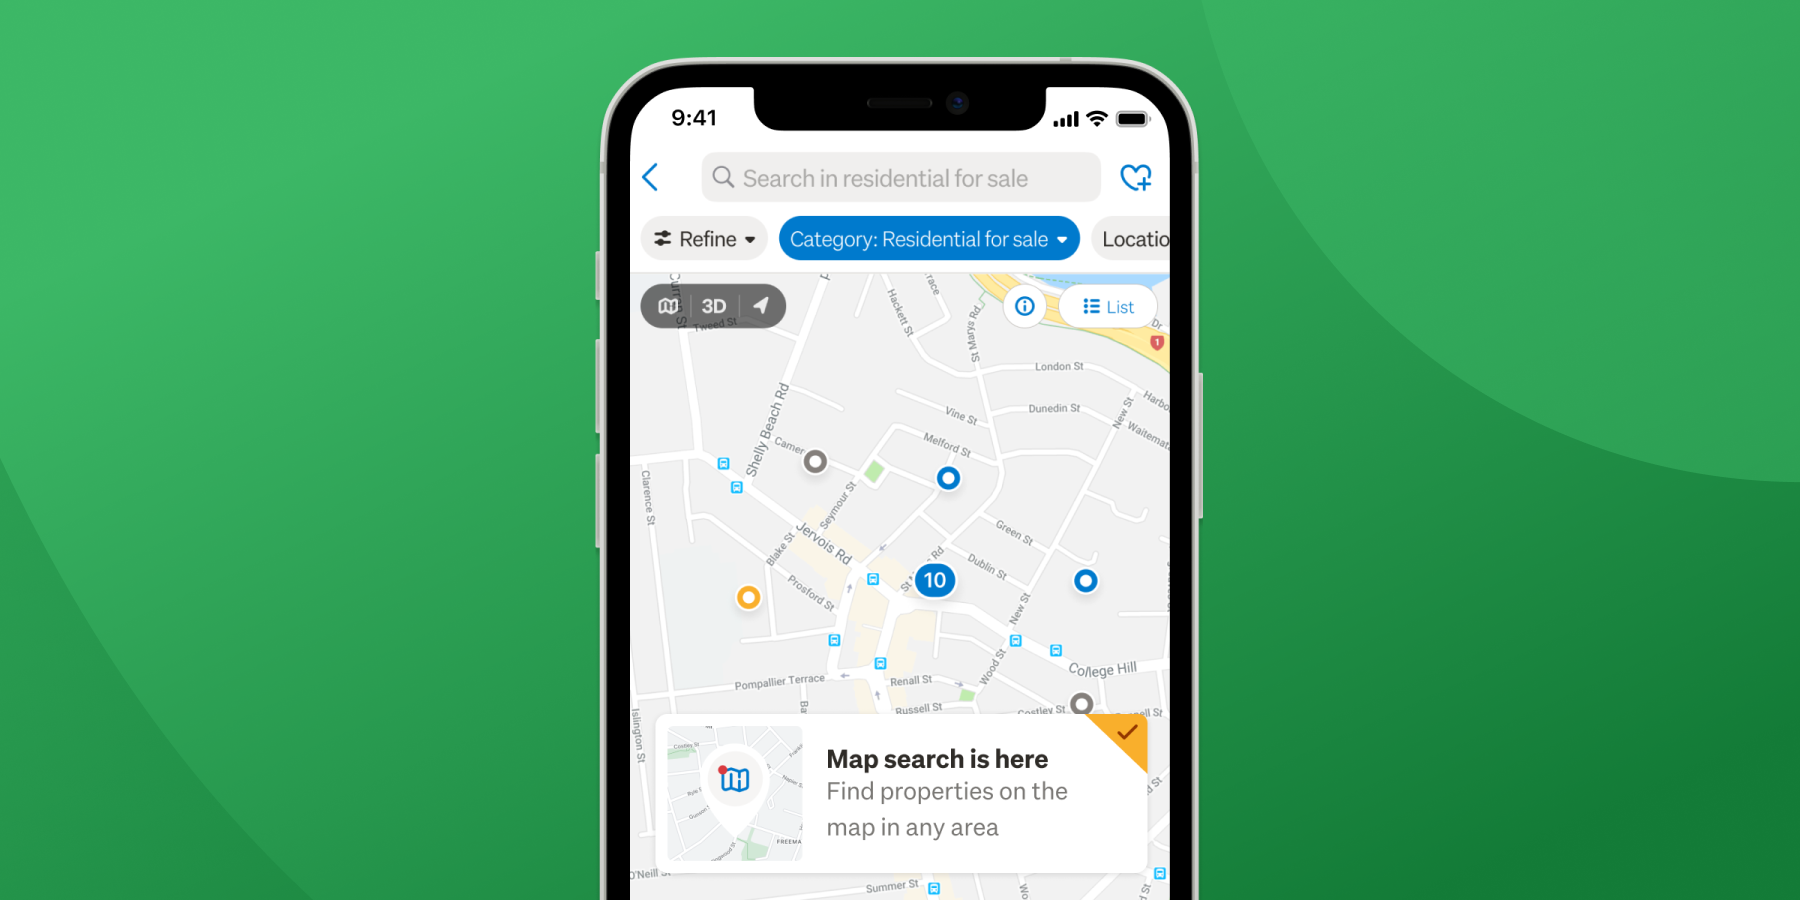 Map based search is now available on the Trade Me app